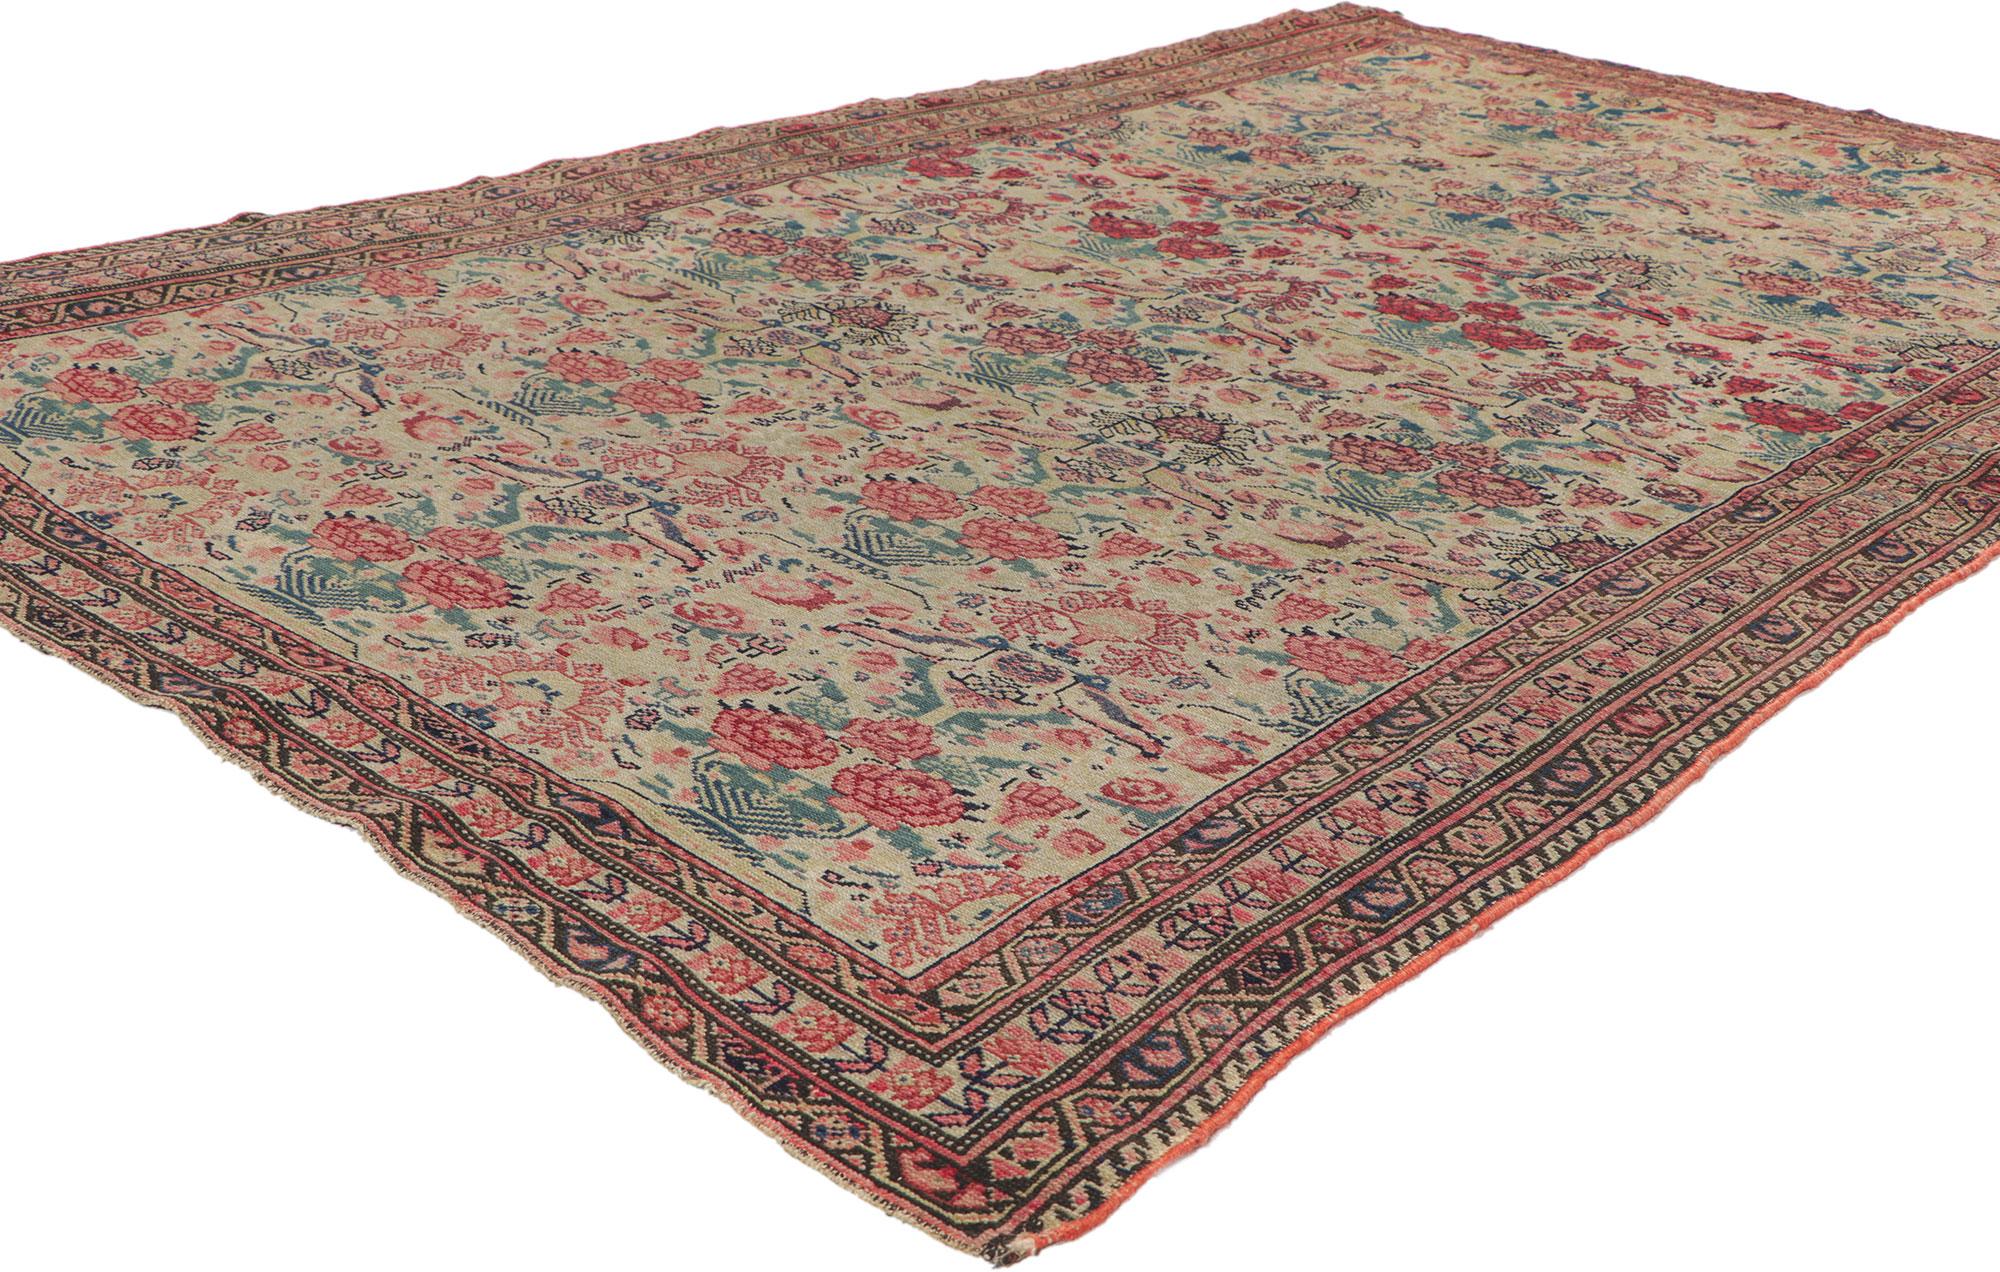 78517 Antique Persian Mishan Malayer rug, 04'01 x 06'02. Emanating timeless style with incredible detail and texture, this hand knotted wool antique Persian Mishan Malayer rug is a captivating vision of woven beauty. The eye-catching Zili Sultan